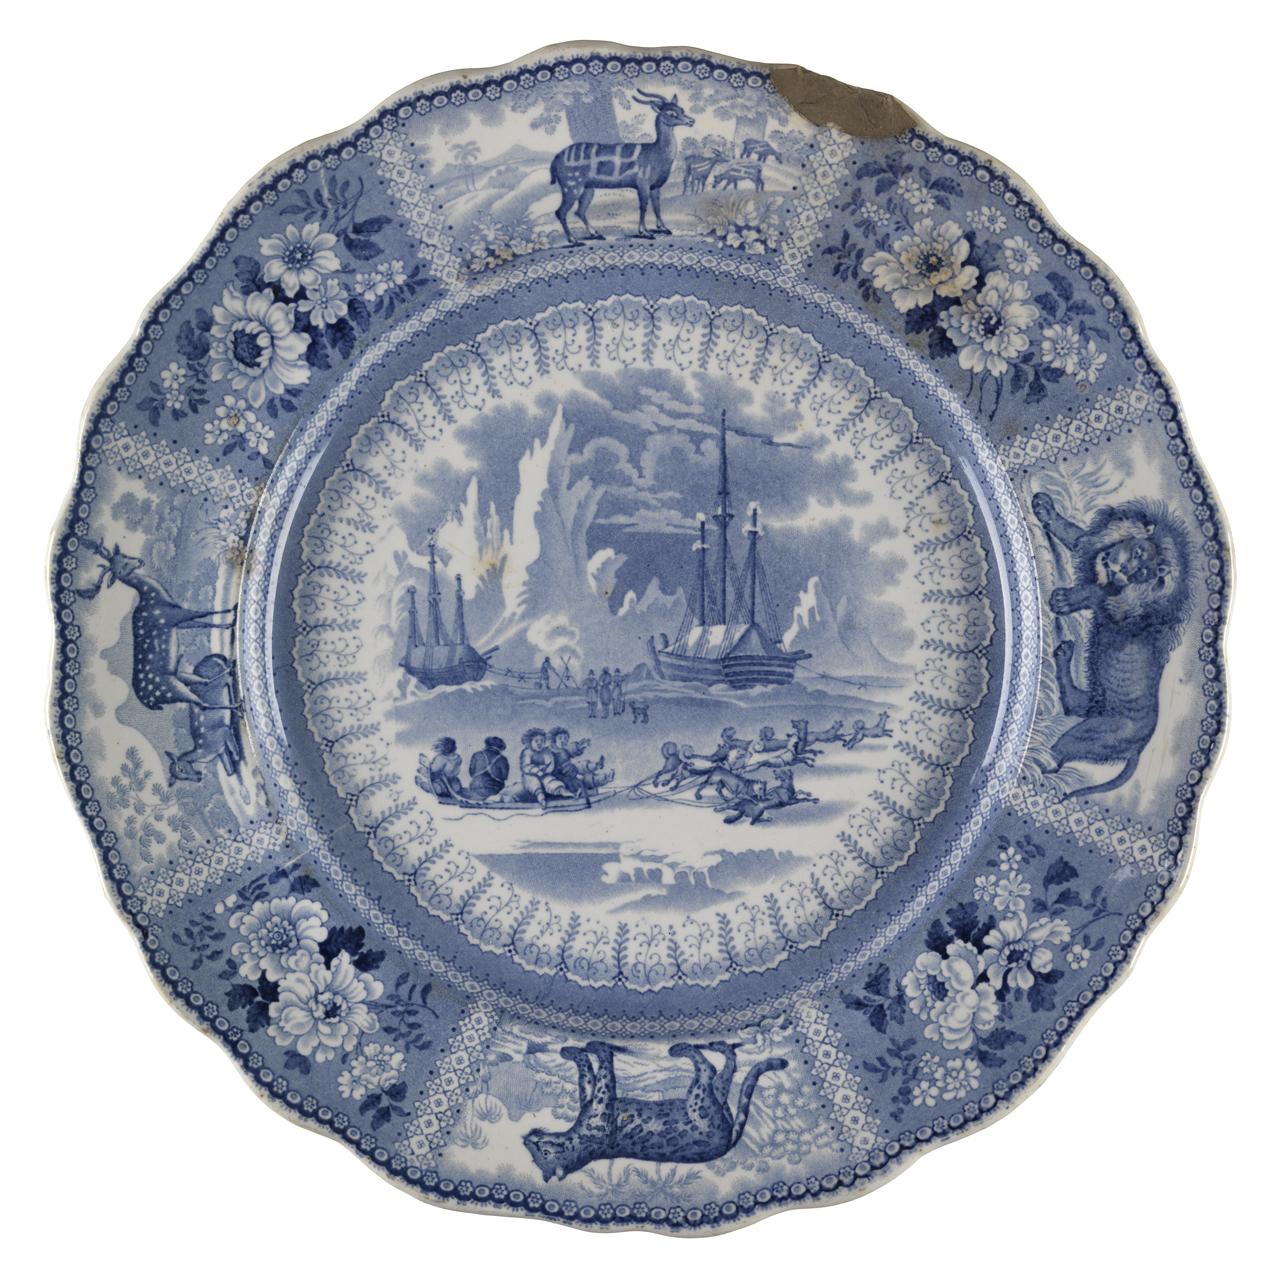 Commemorative dinner plate depicting scenes from Parry’s voyages 